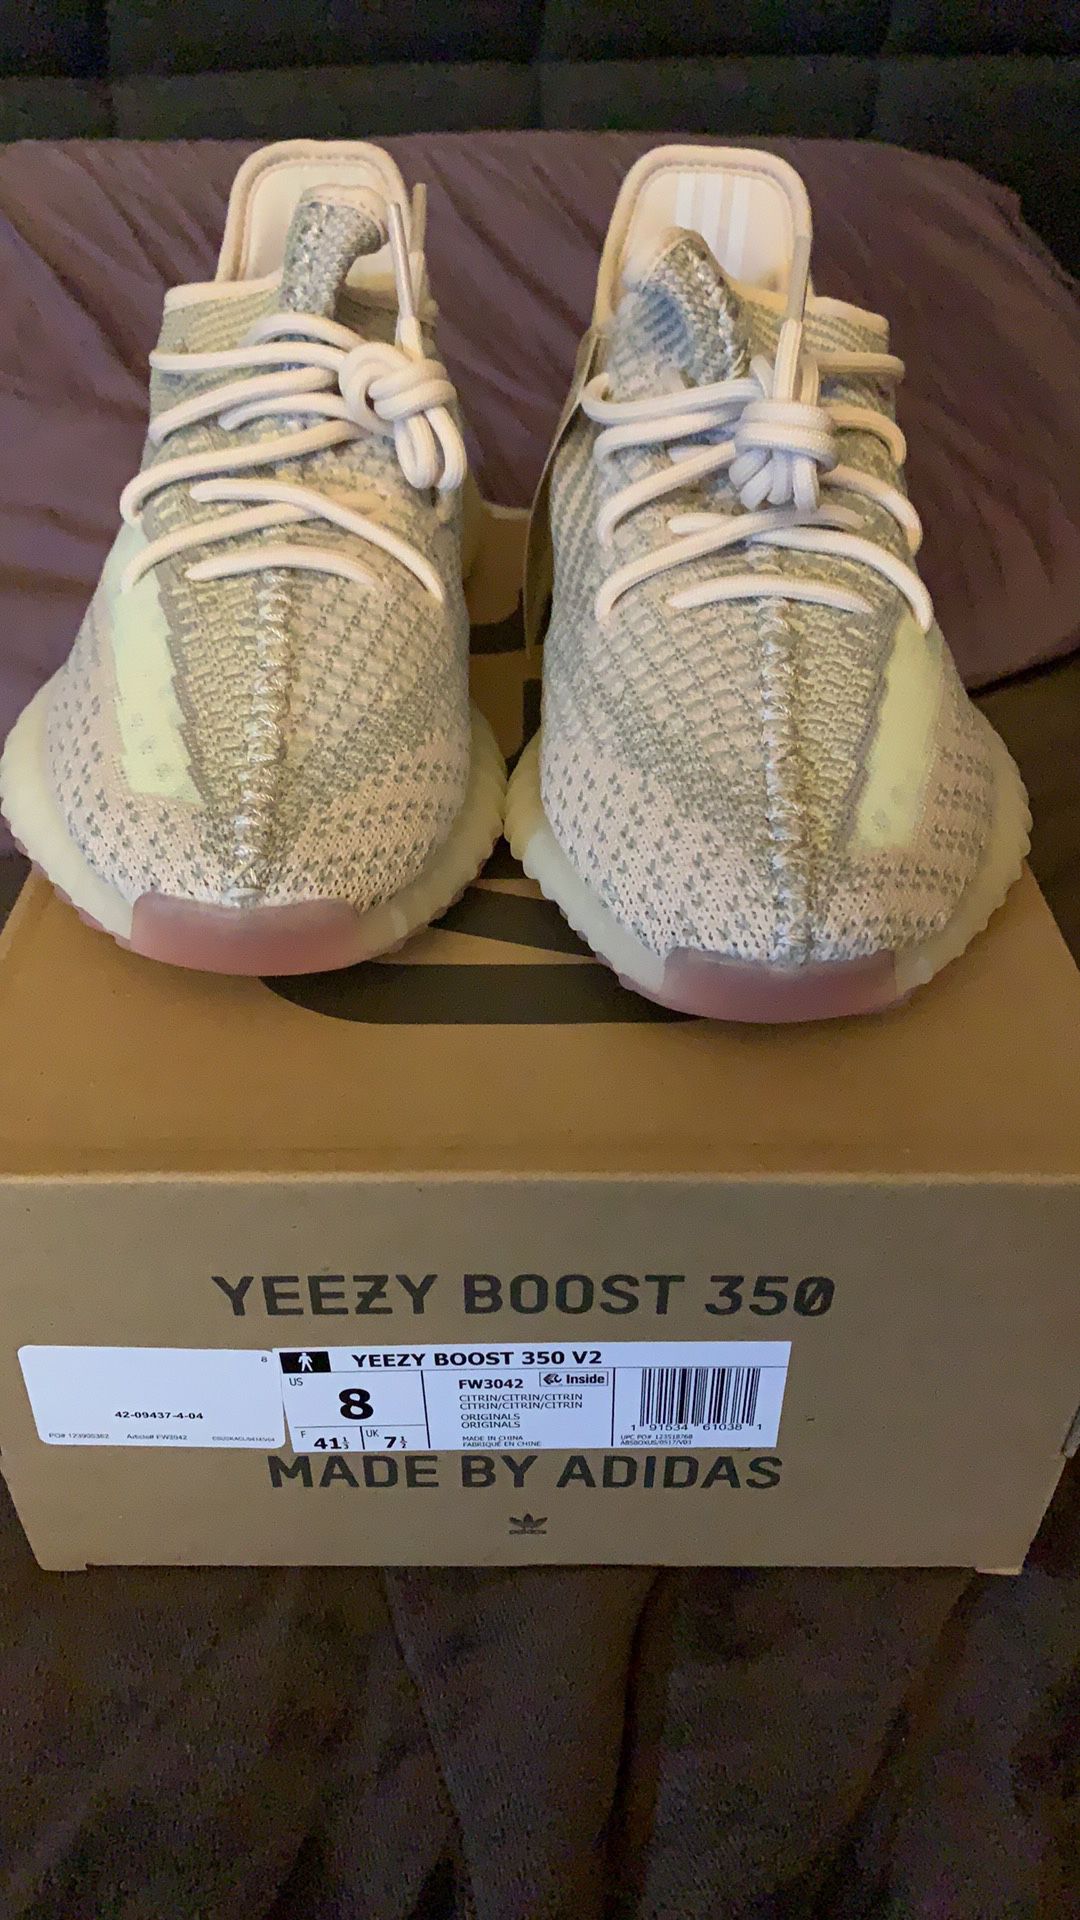 Yeezy 350 “Citrin” (Size 8) DSWT